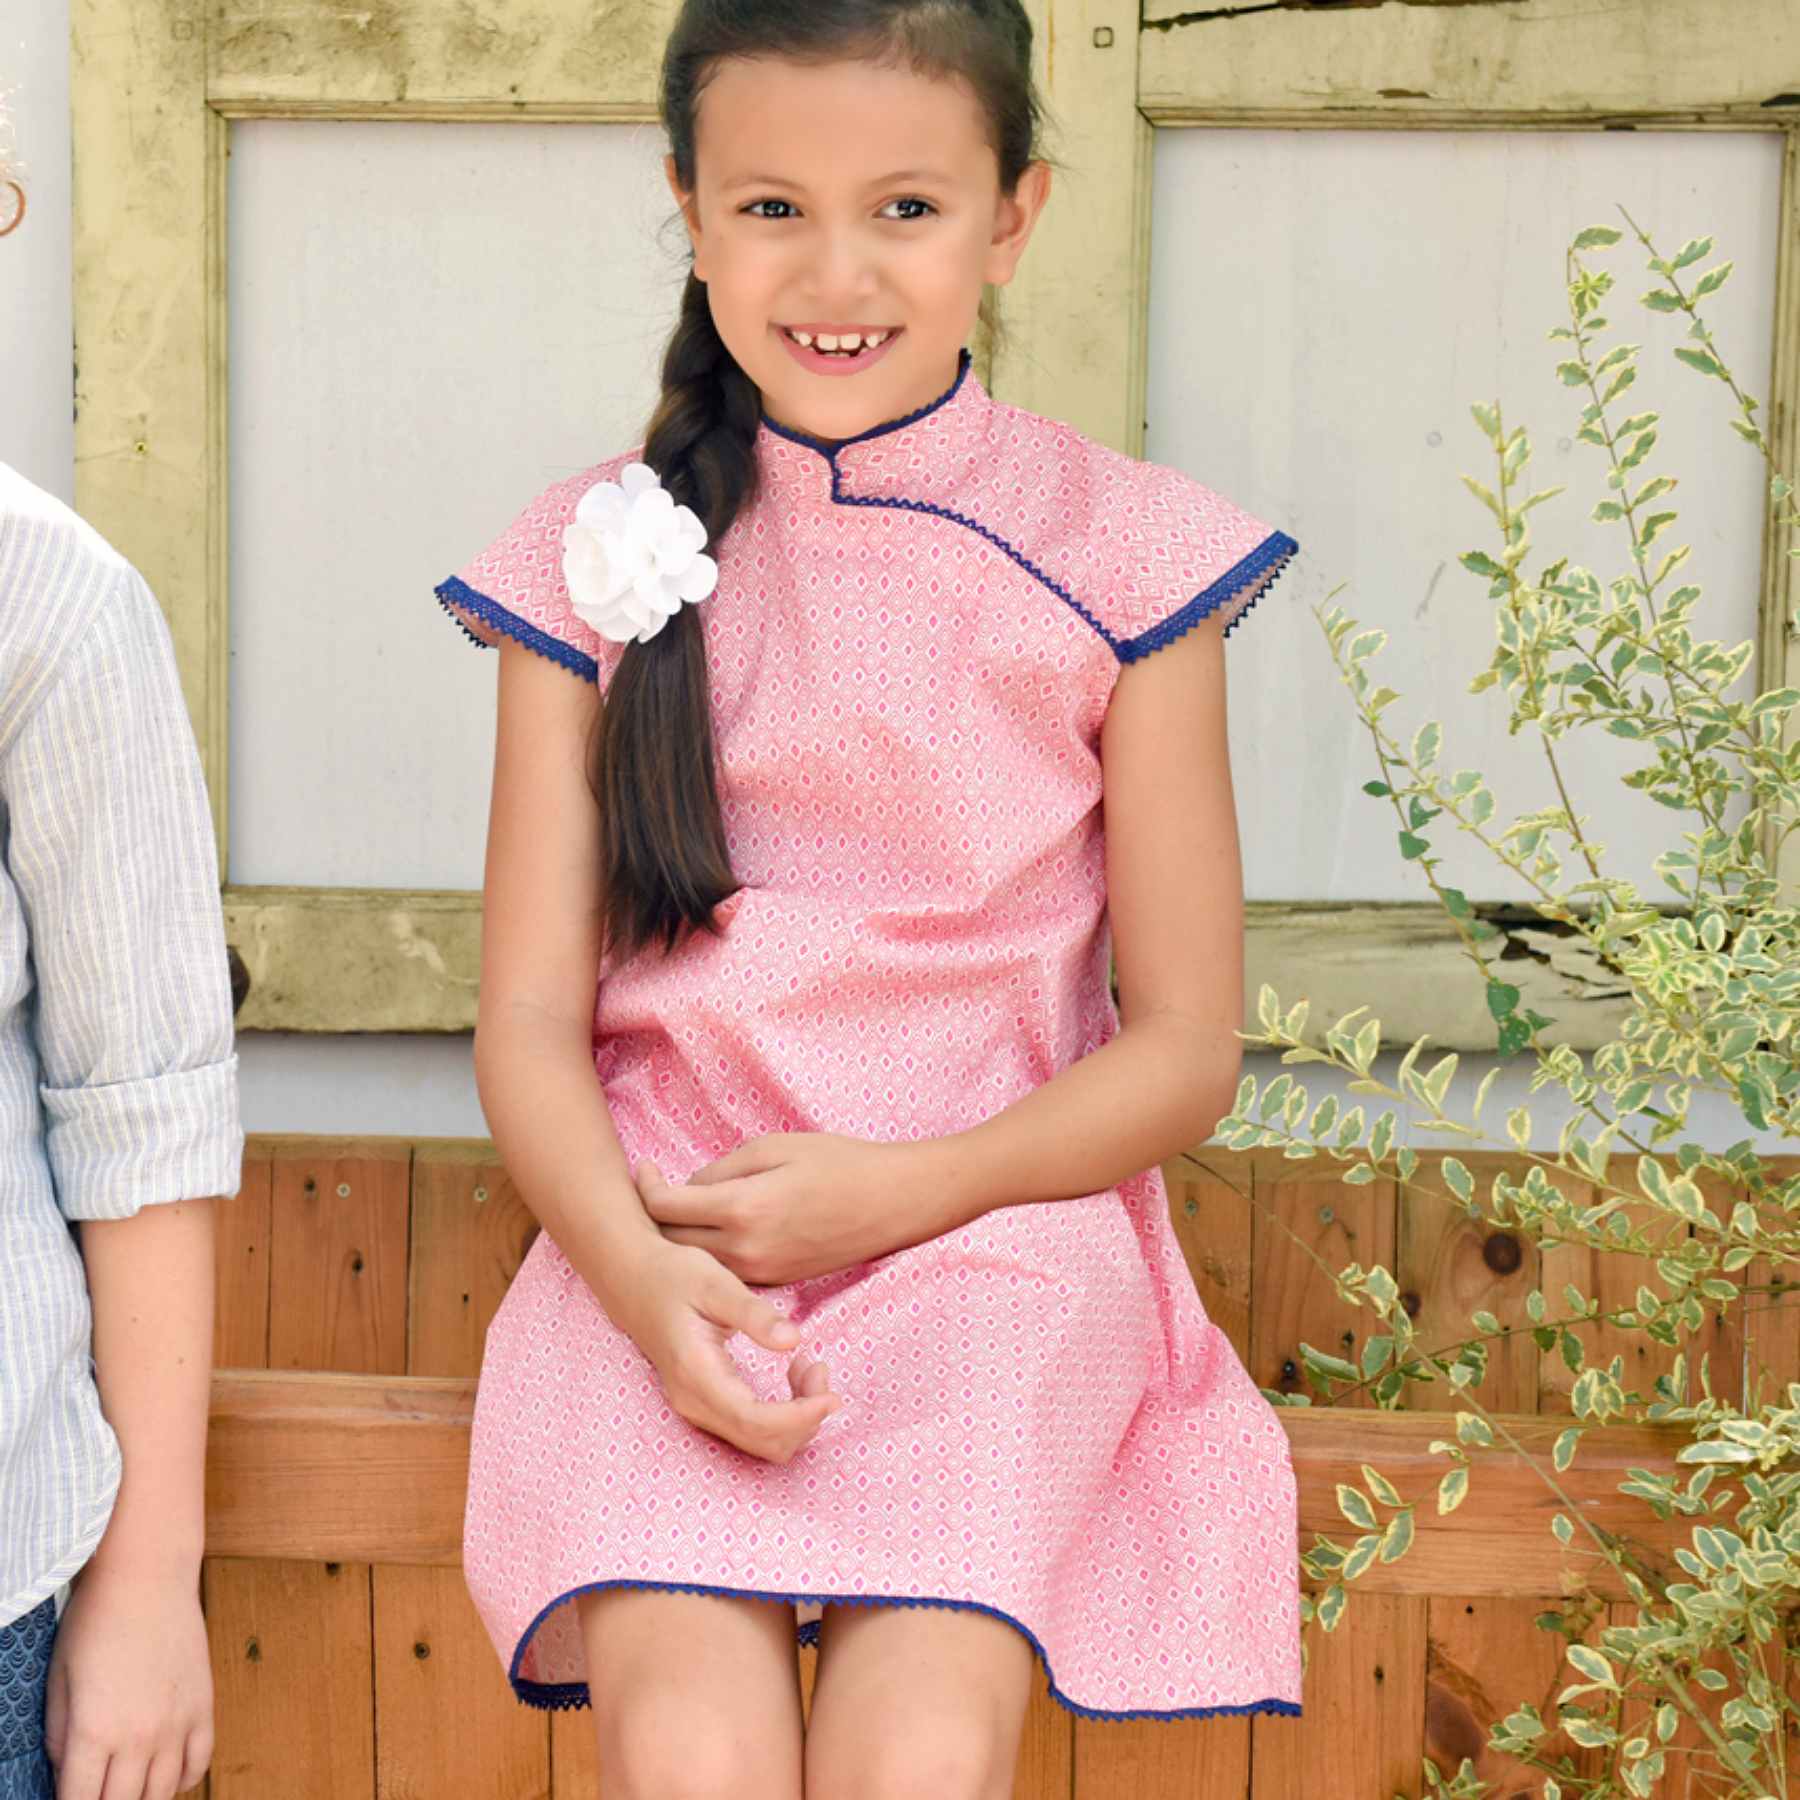 Elegant Chinese dress in pink fuchsia cotton diamond print. and white, Mao collar trimmed with fine navy blue English lace, short bias sleeves from the children's fashion brand LA FAUTE A VOLTAIRE